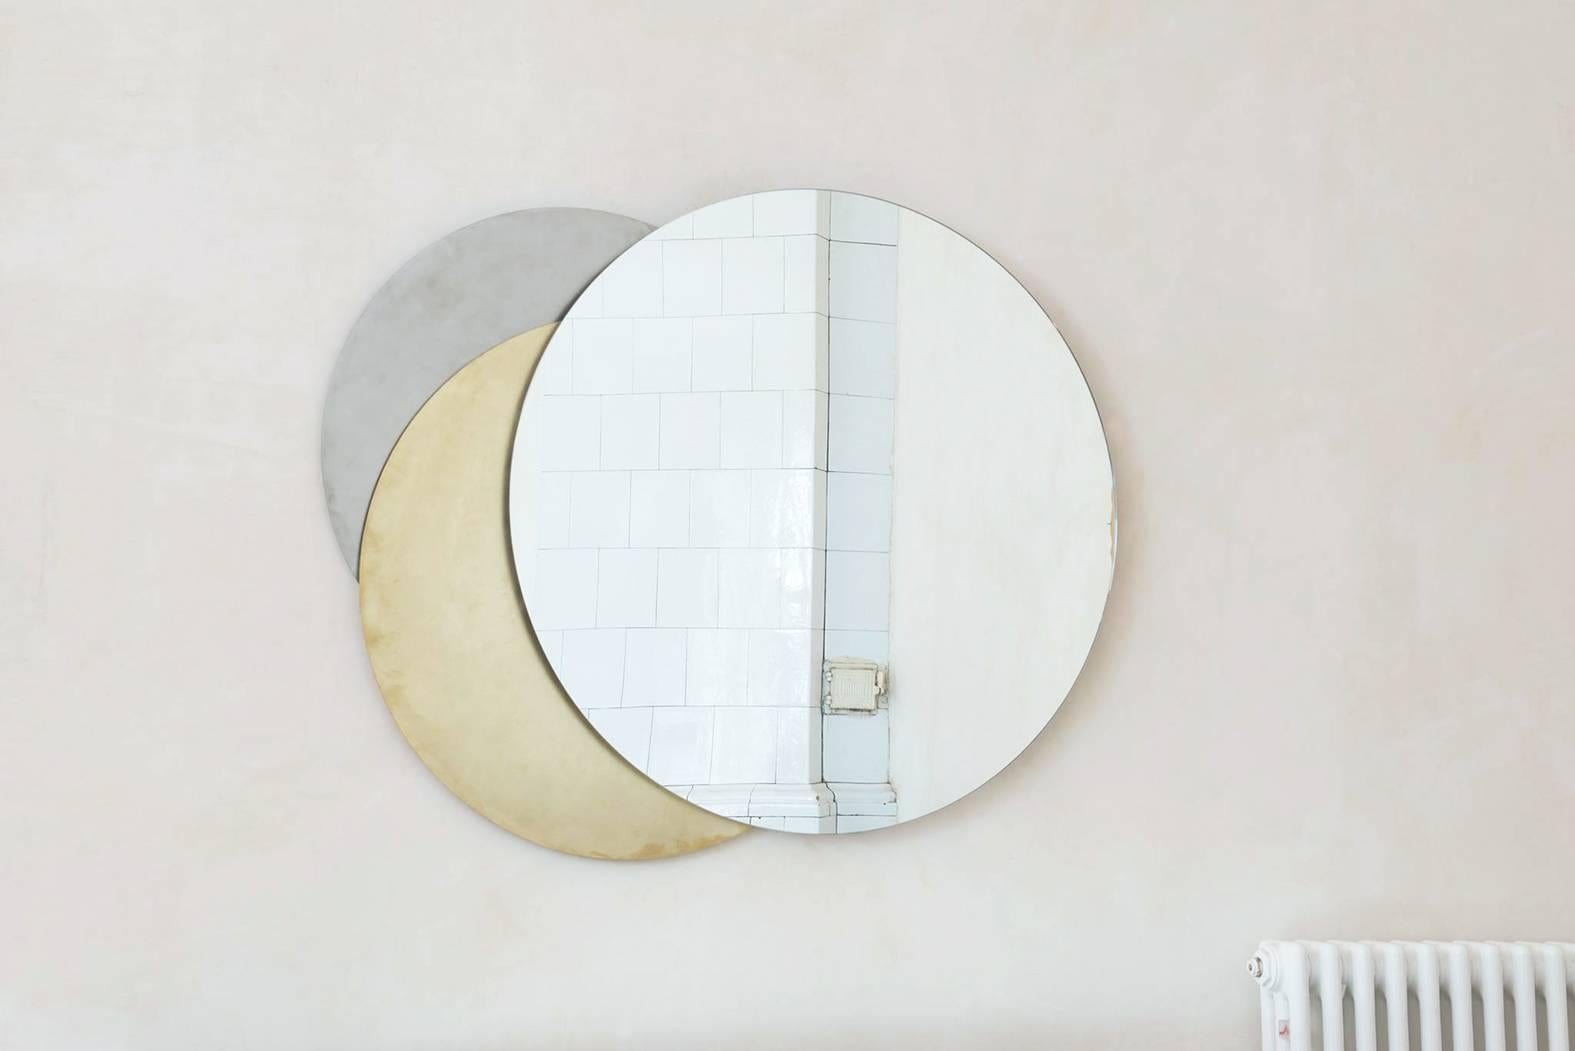 Dimensions: L 64, H 76cm.
Materials: Brass/mirror/stainless steel

Eclipse Mirror
“We need an inner light, which will stay in us, even when dark”. Being obsessed with the beauty and the mystery of the sun and the moon, Rooms decided to bring them